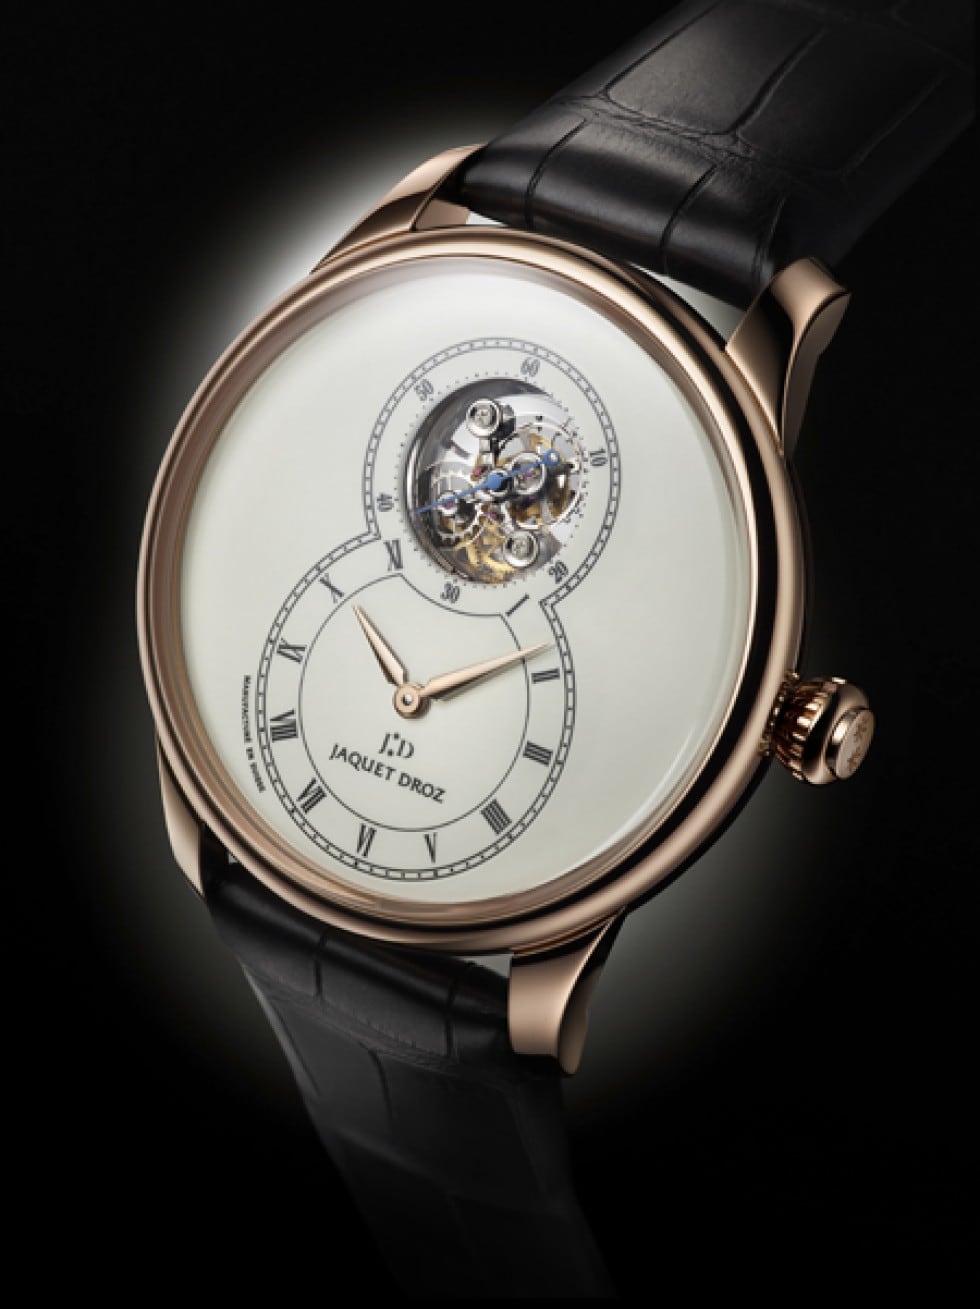 THE NEW JAQUET DROZ TOURBILLON: A TECHNICAL AND AESTHETIC CHALLENGE ...